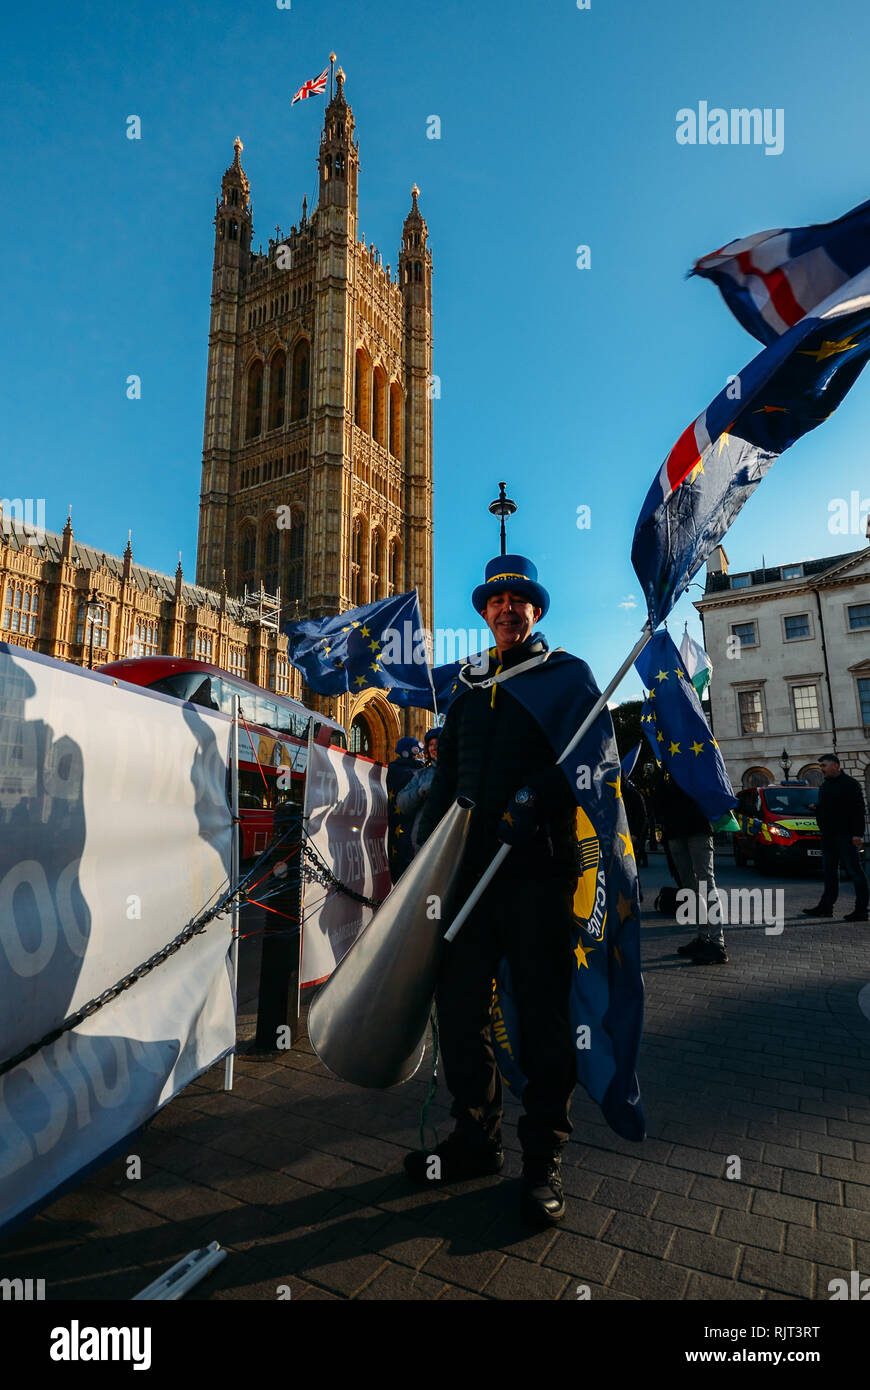 London, UK - Feb 7, 2019: Steve Bray, founder of Sodem (Stand of Defiance European Movement) protesting against Brexit outside the Houses of Parliament, London Credit: Alexandre Rotenberg/Alamy Live News Stock Photo